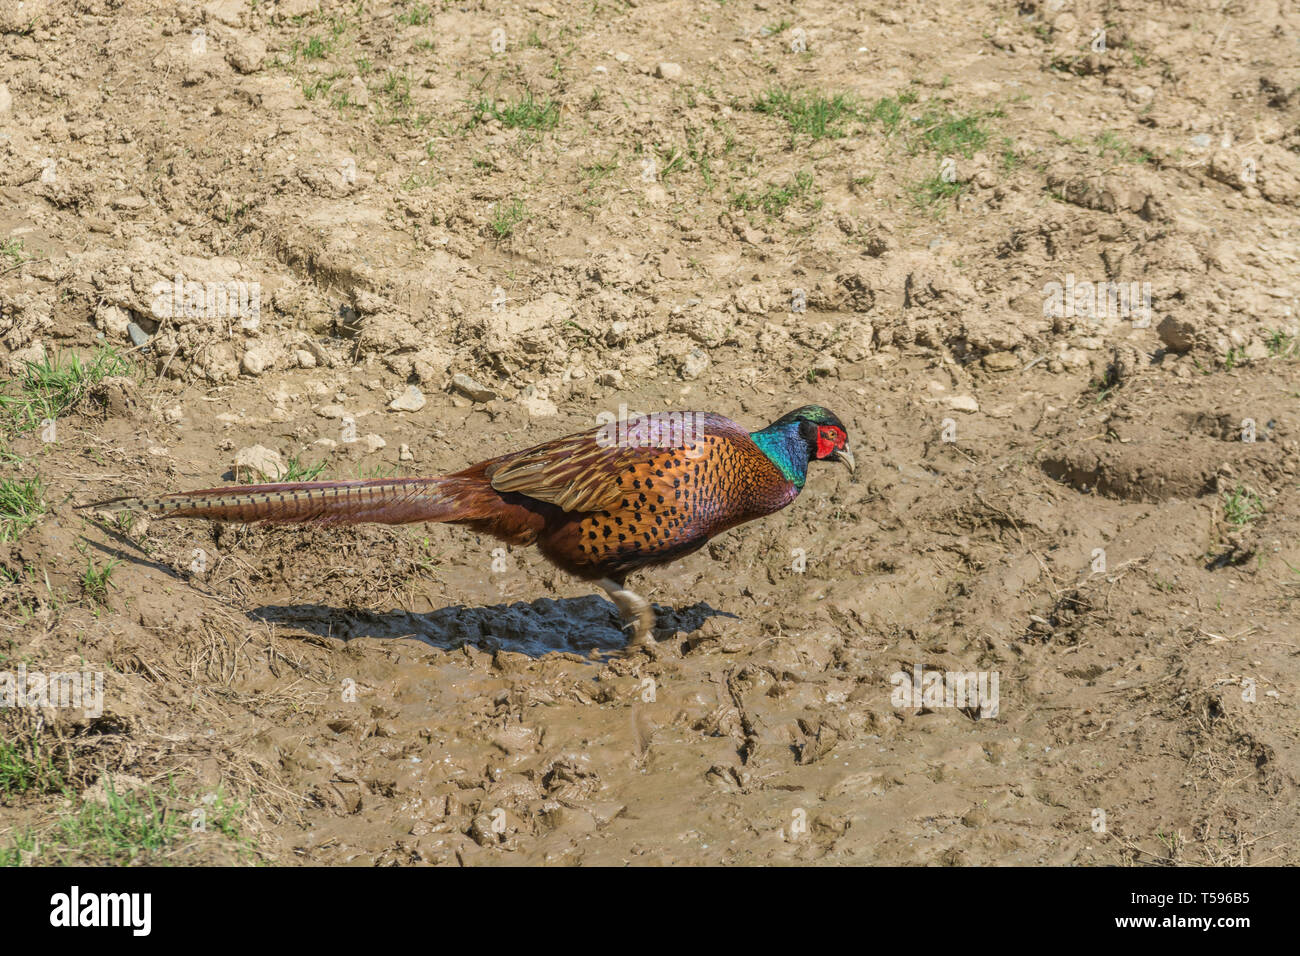 Believed to be the Common Pheasant / Phasianus colchicus. Male gamebird hunting for food in ploughed field. Stock Photo